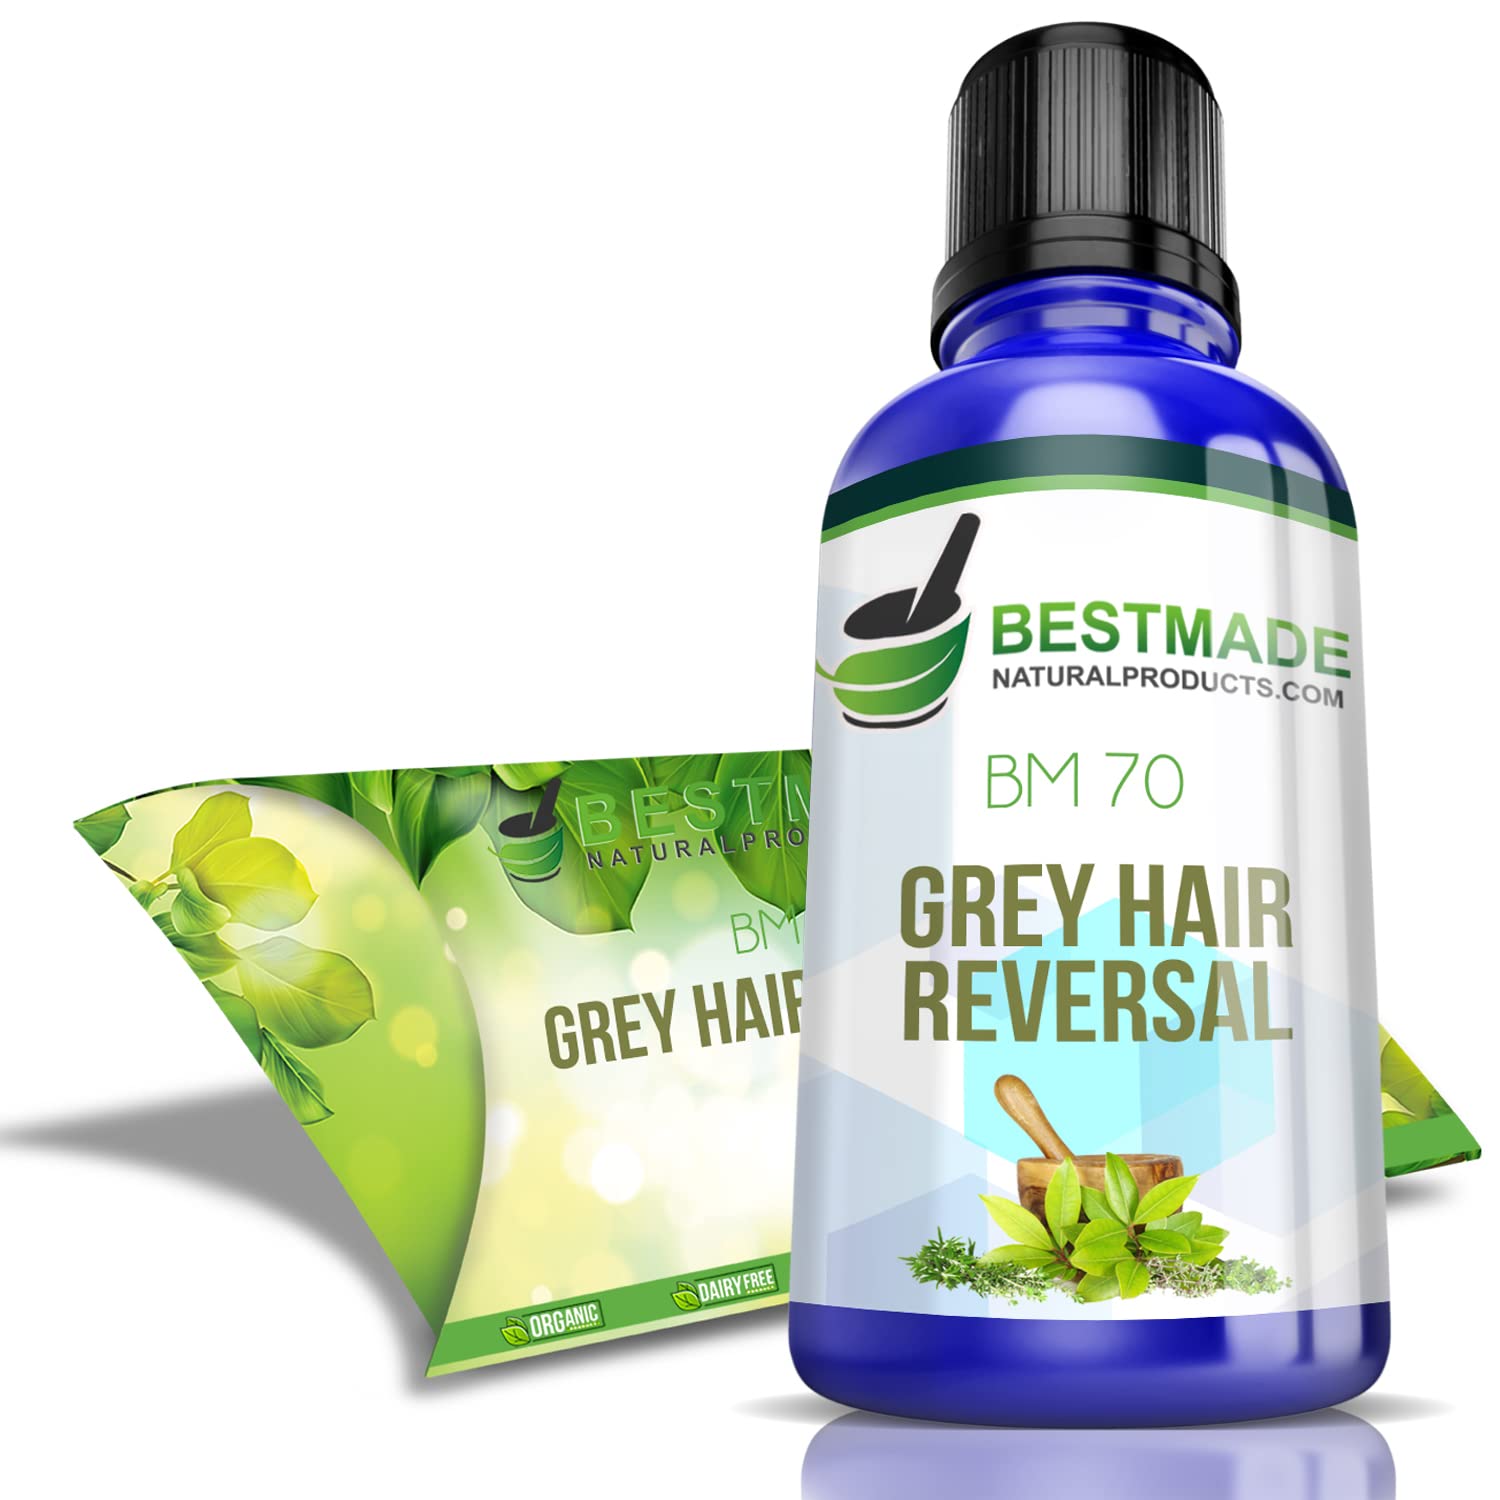 Amazon.com: Grey Hair Reversal BM70 - Effective & Natural Anti Grey Hair Treatment & Prevention - Helps Reverse Issues Related to Premature & Greying Due to Stress and Illness - 30mL -